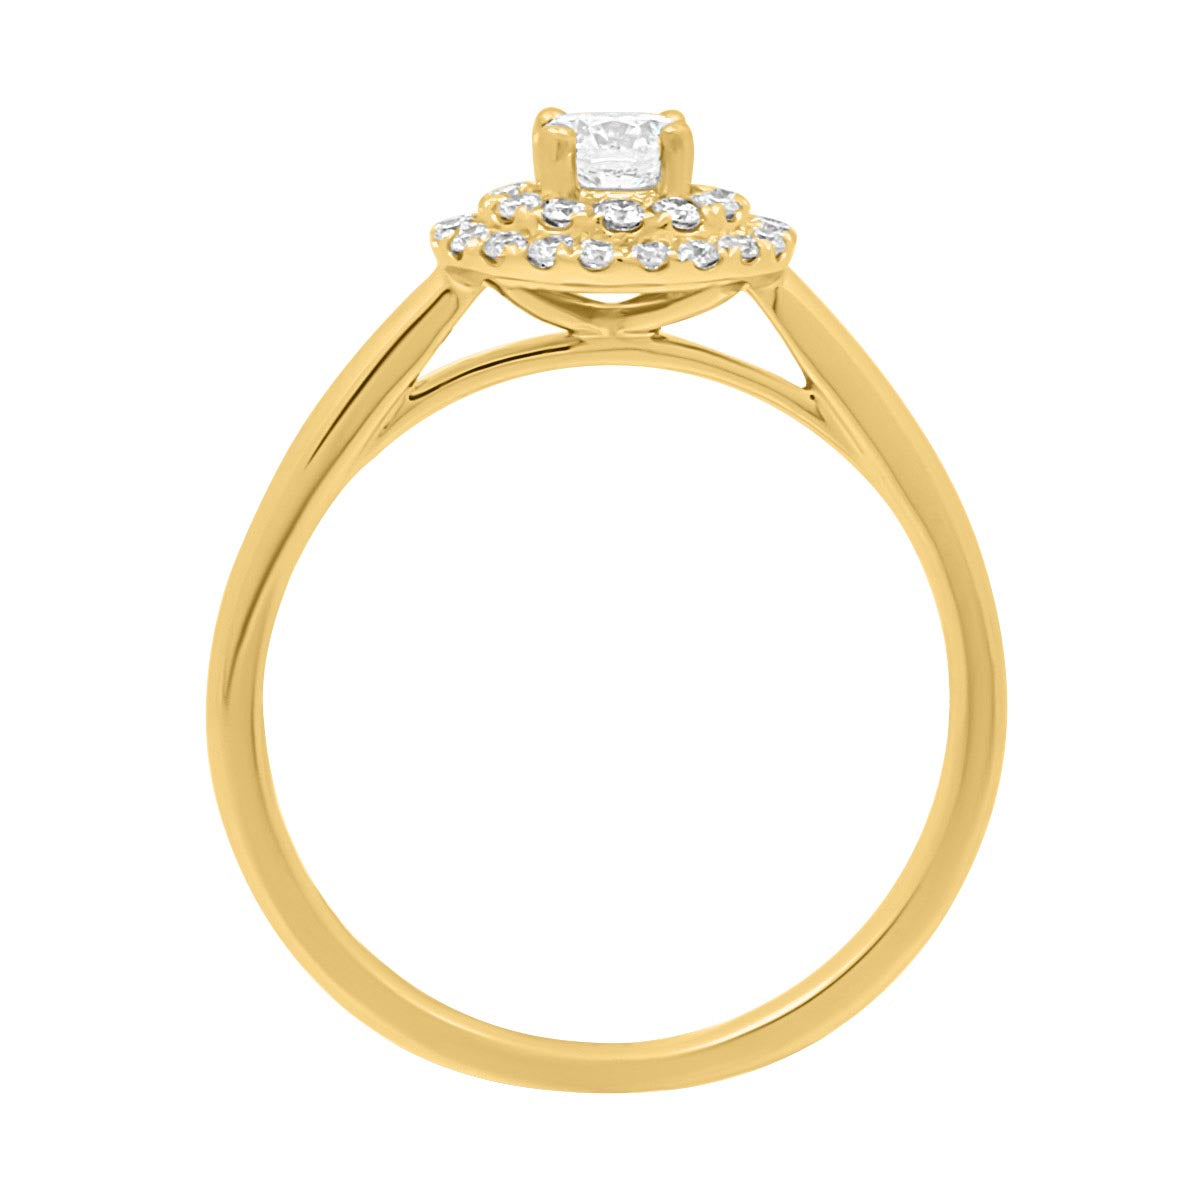 Ornate Diamond Ring WITH DOUBLE HALO SET IN YELLOW GOLD FROM AN ANGLE